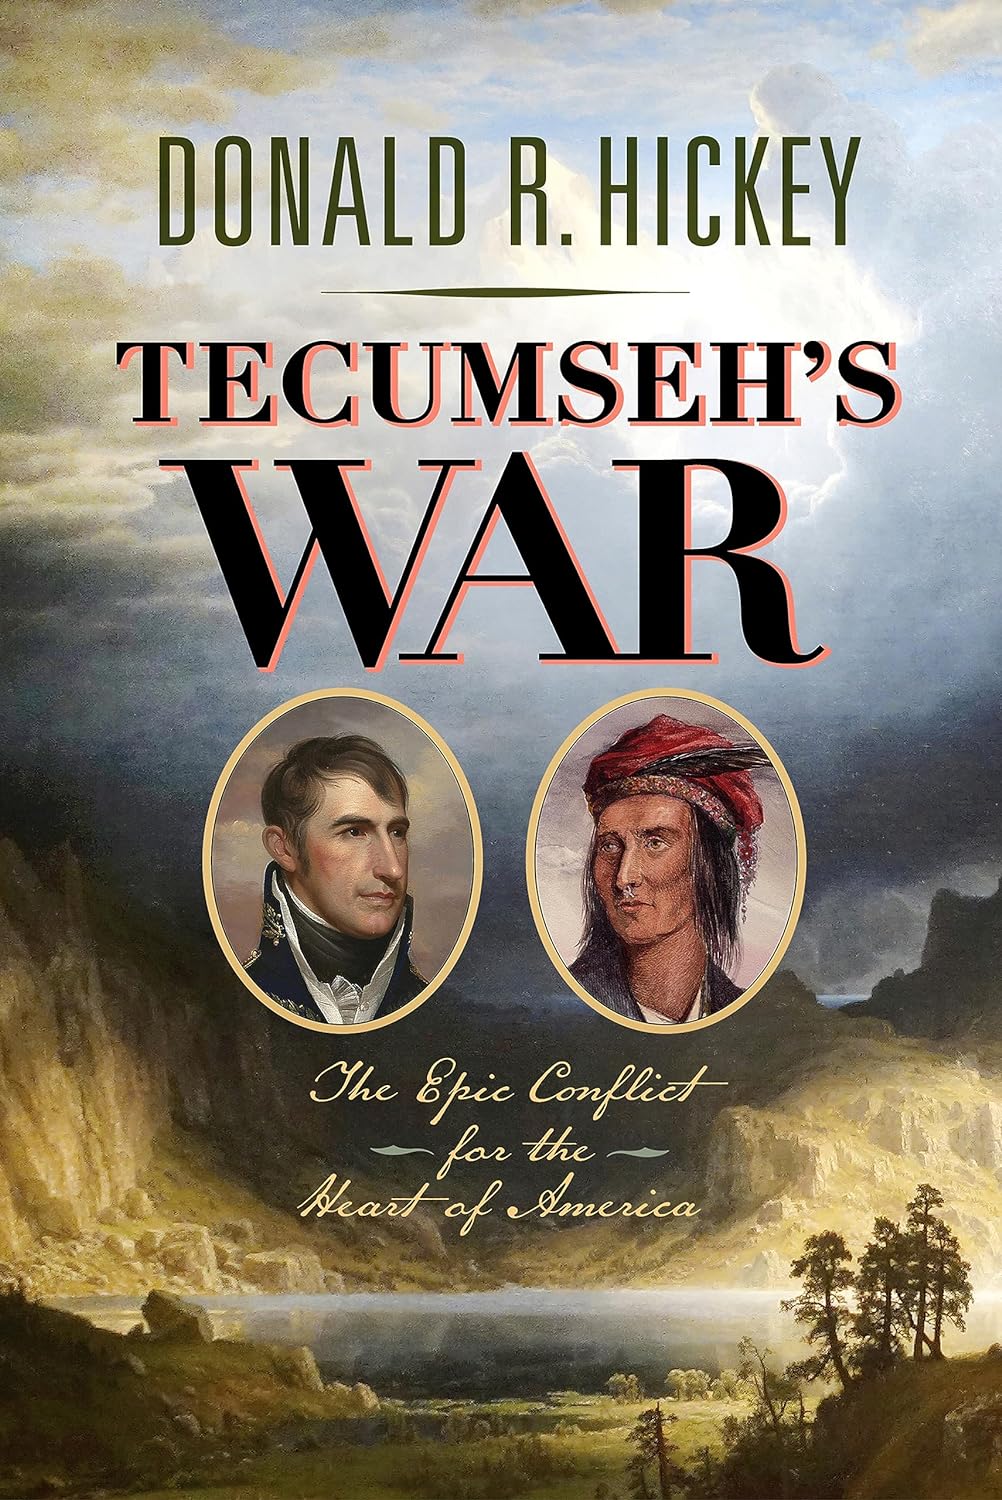 Tecumseh’s War: The Epic Conflict for the Heart of America